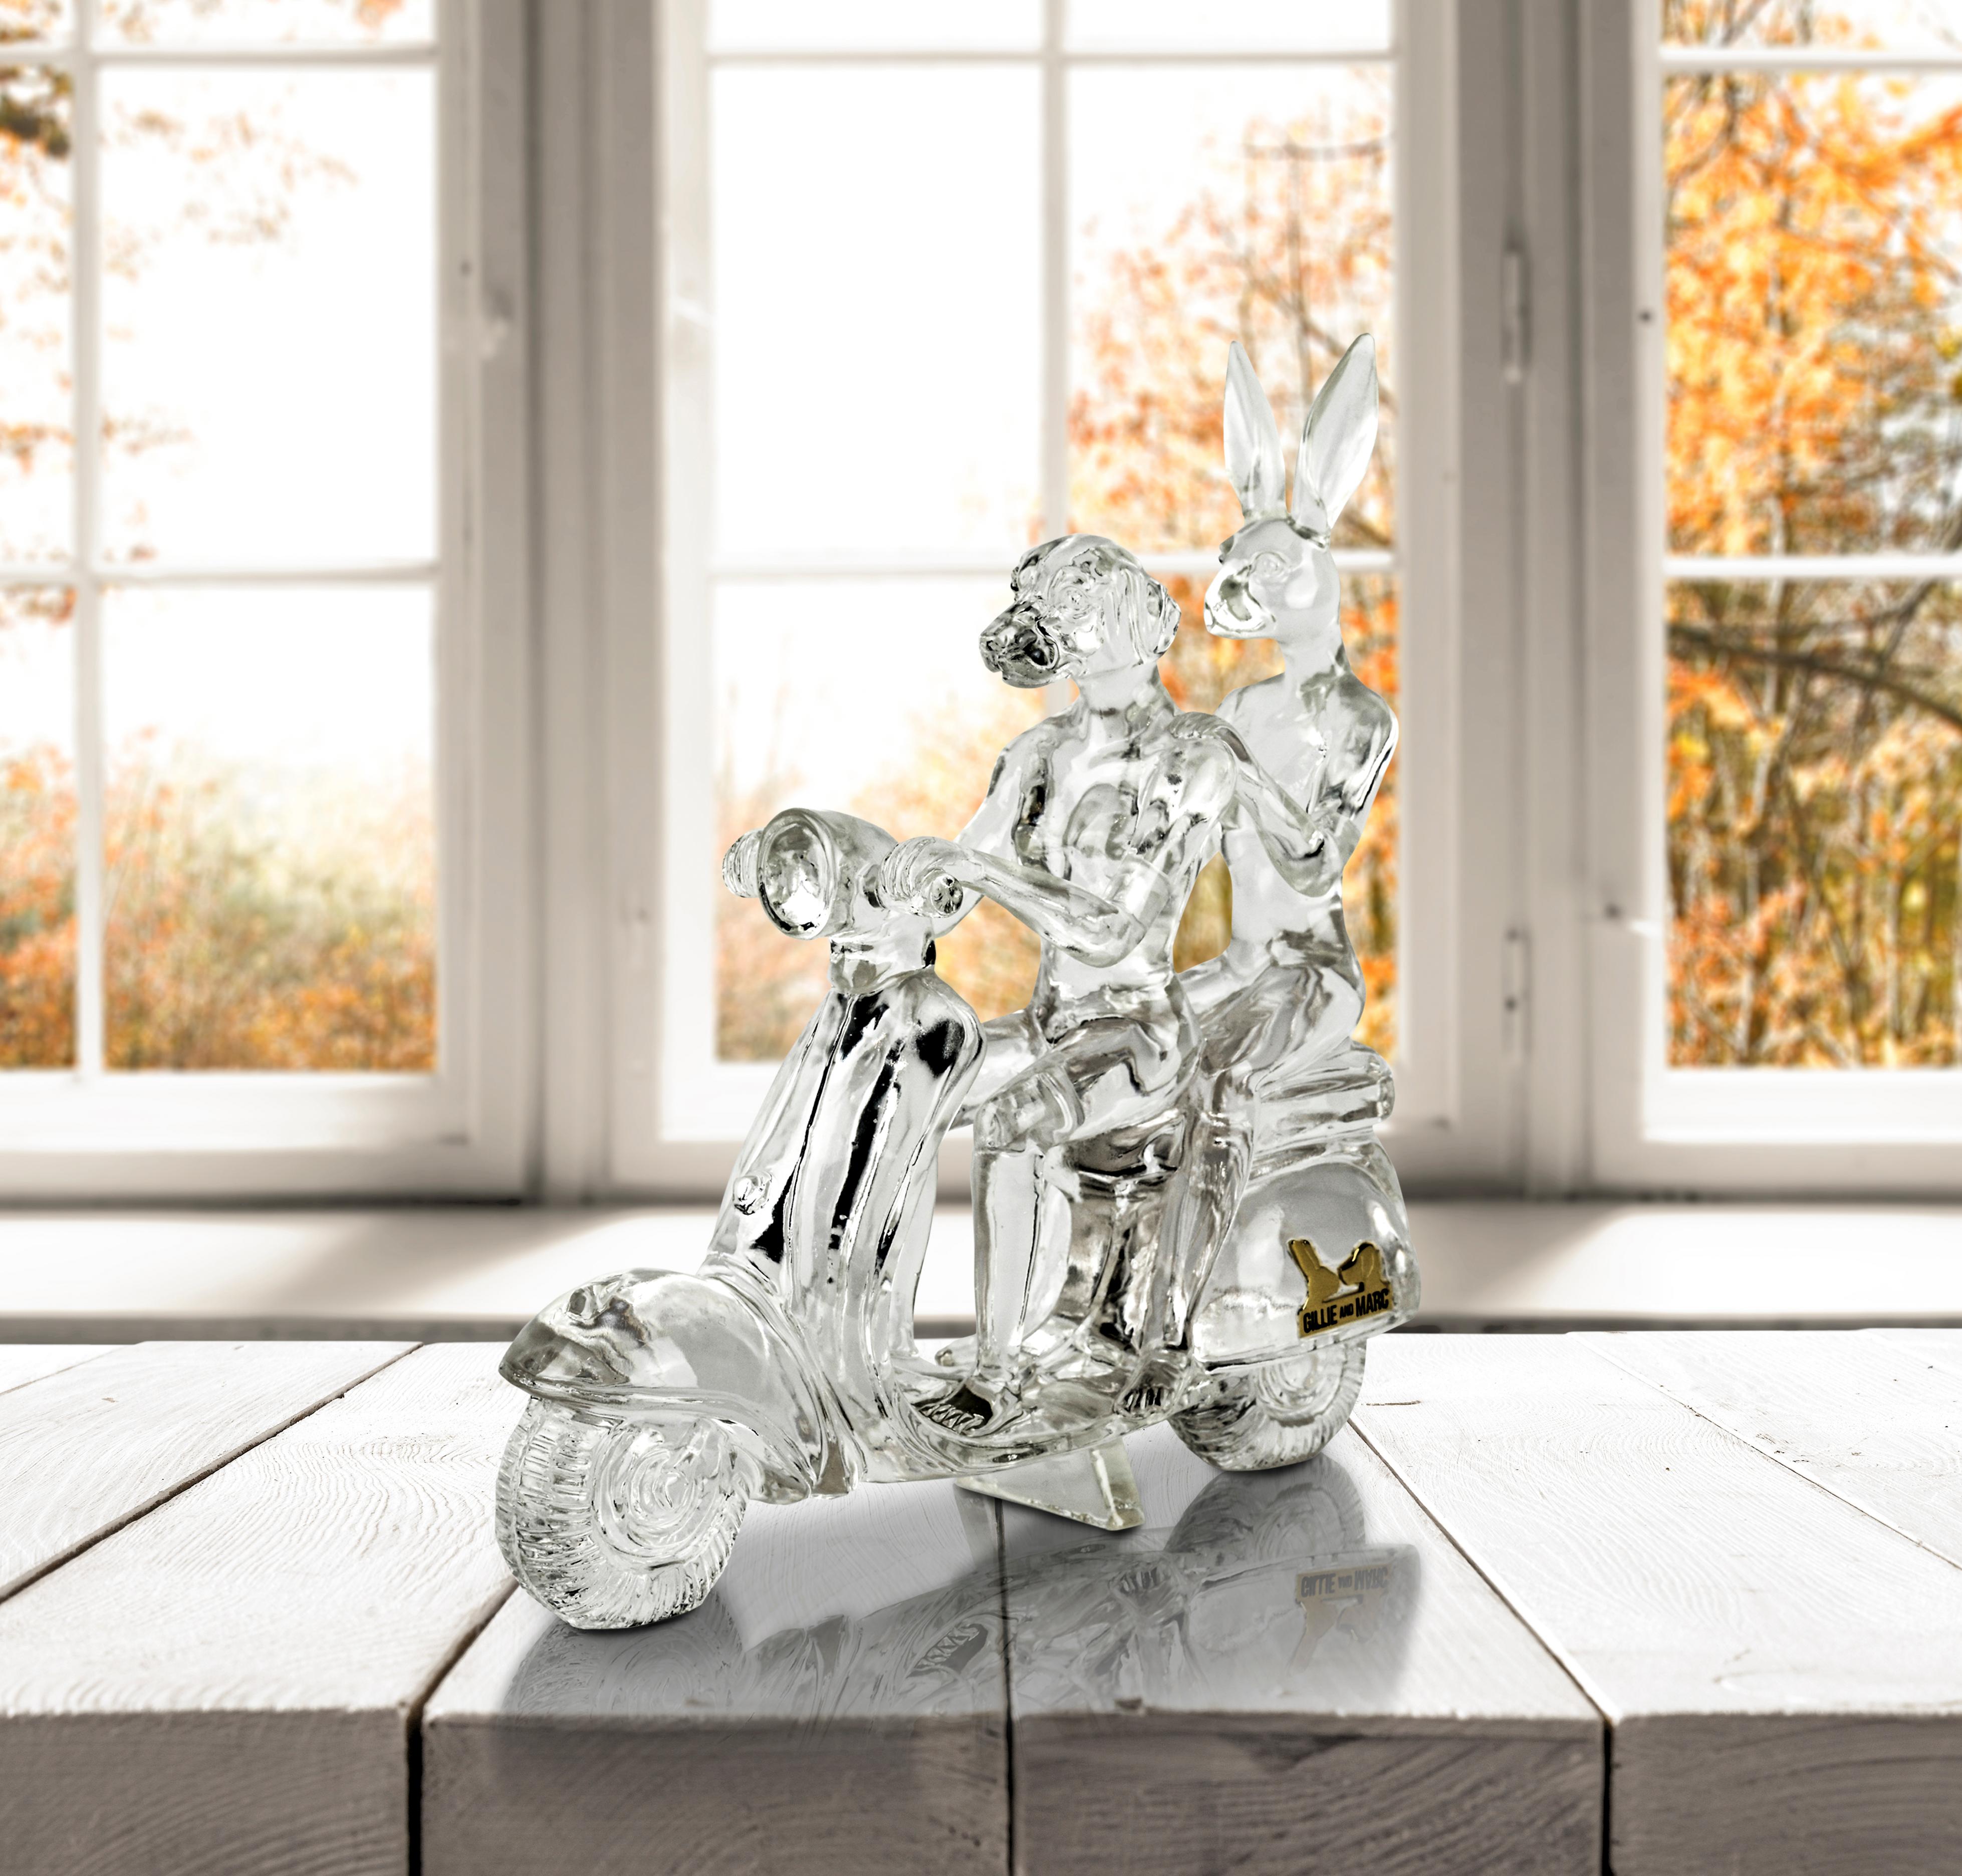 Title: Lolly happy mini vespa rider in Clear 
Authentic resin sculpture

This authentic resin sculpture titled 'Lolly happy mini vespa riders' in clear by artists Gillie and Marc has been meticulously crafted in resin. It features a Gillie and Marc